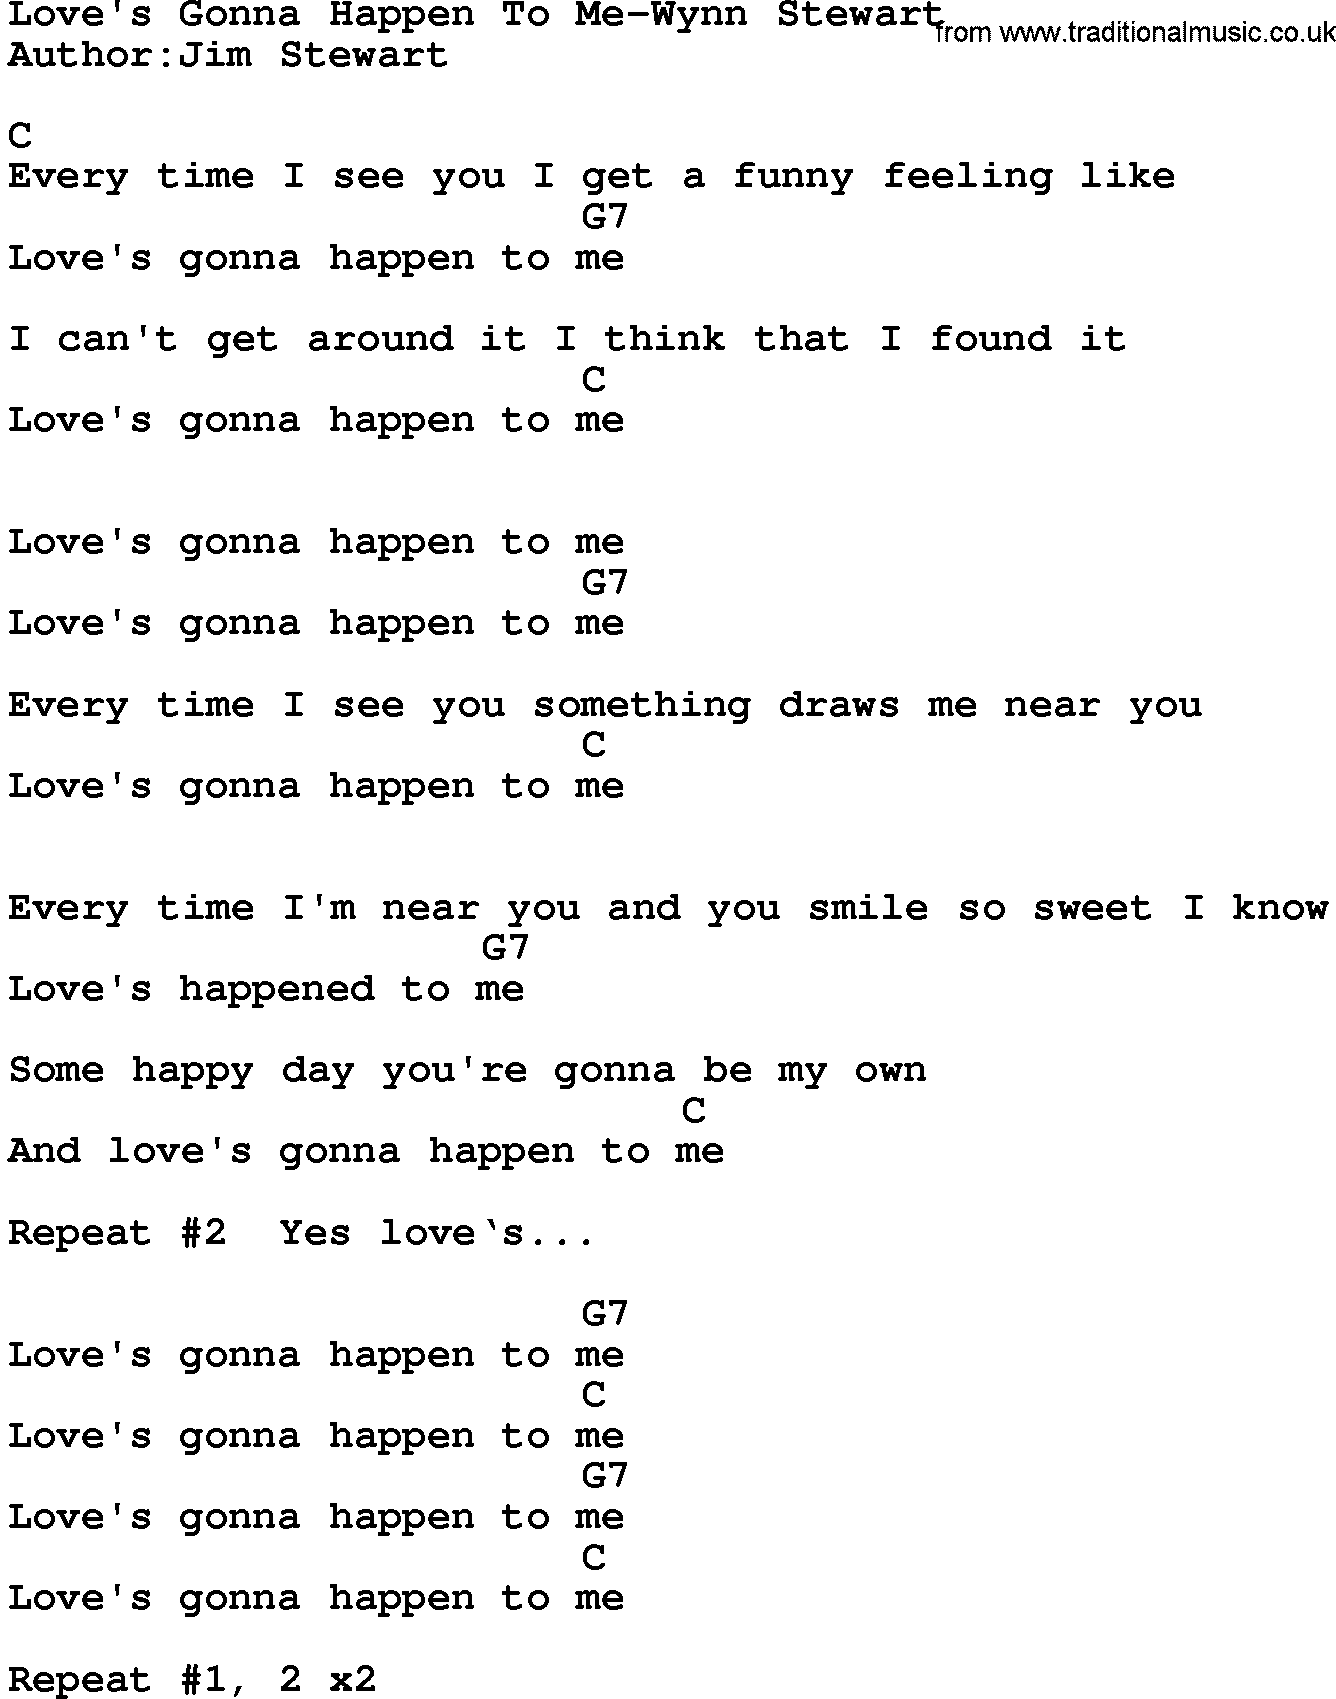 Country music song: Love's Gonna Happen To Me-Wynn Stewart lyrics and chords